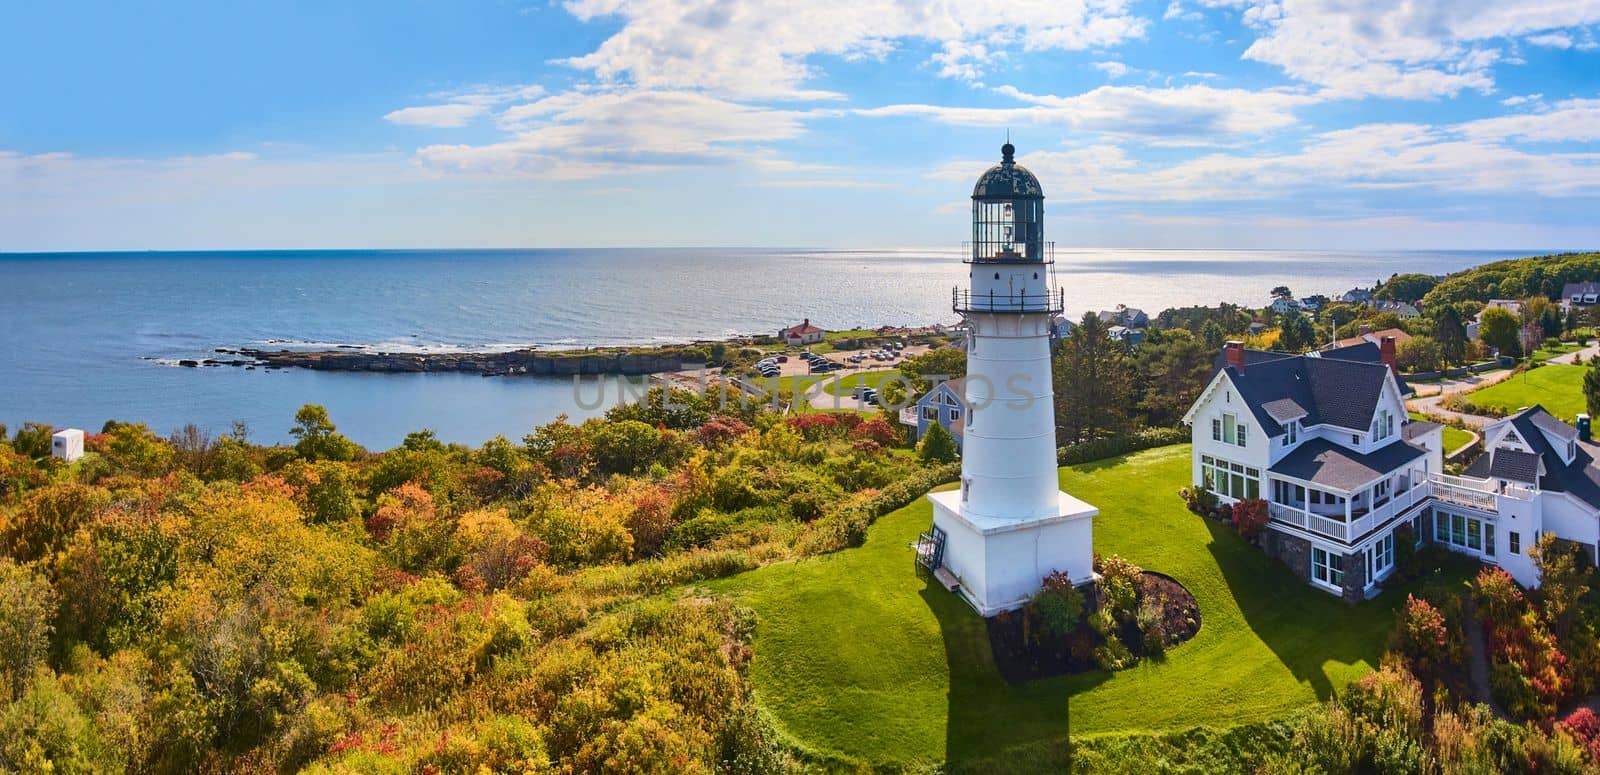 Image of Lighthouse on hill with house overlooking stunning Maine coastline in fall